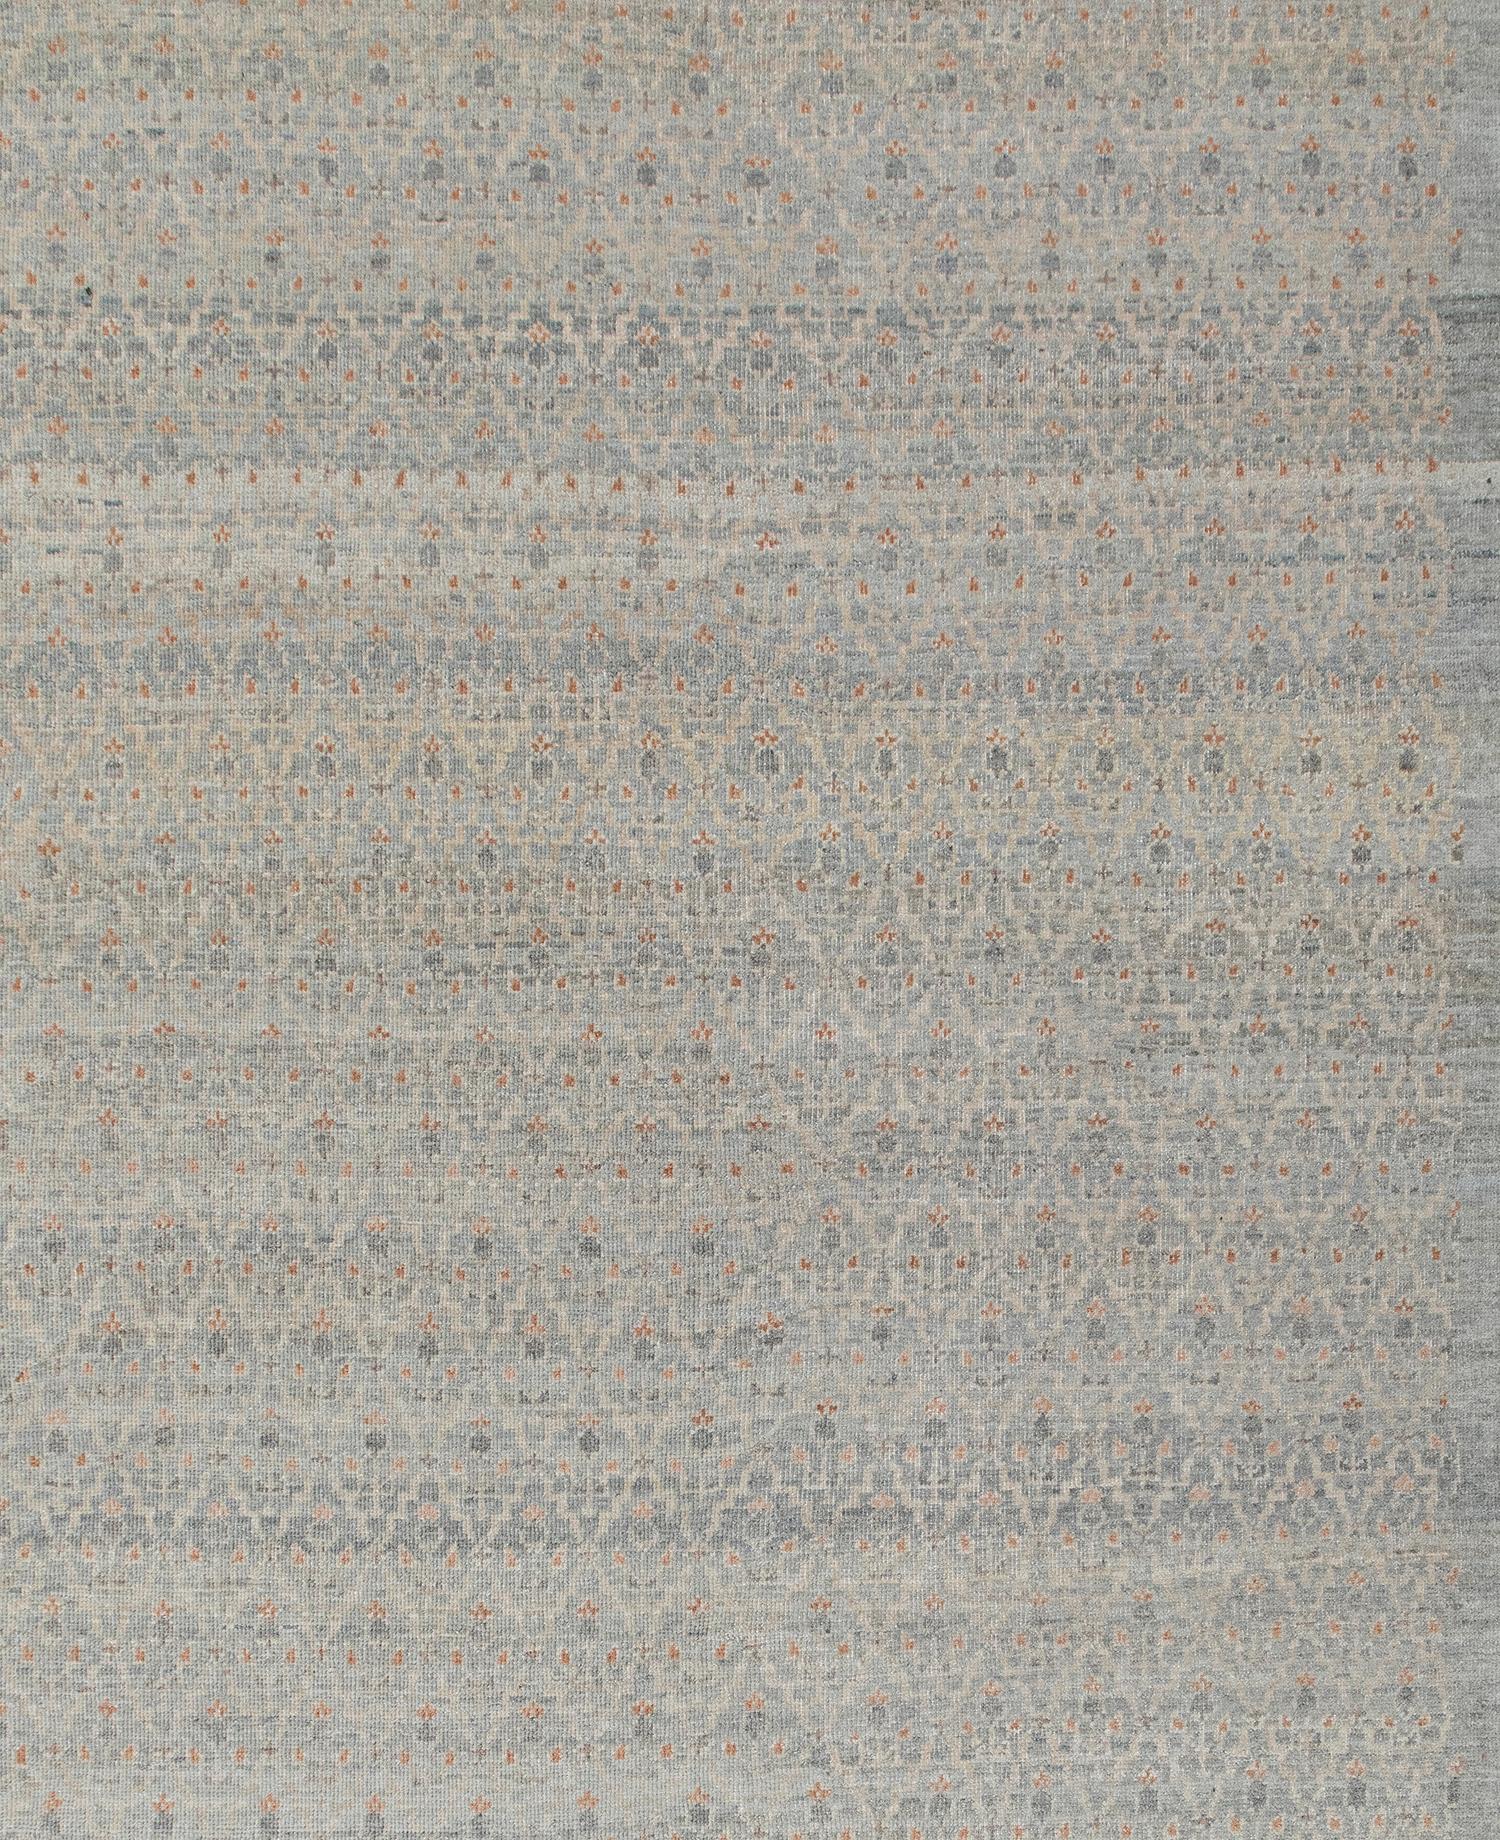 This rug resembles the rare and collectible antique Camehair Serab rugs that were produced in the 19th century and earlier.  Due to their limited availability, NASIRI revived the ancient dyeing and weaving techniques that had dissolved over the